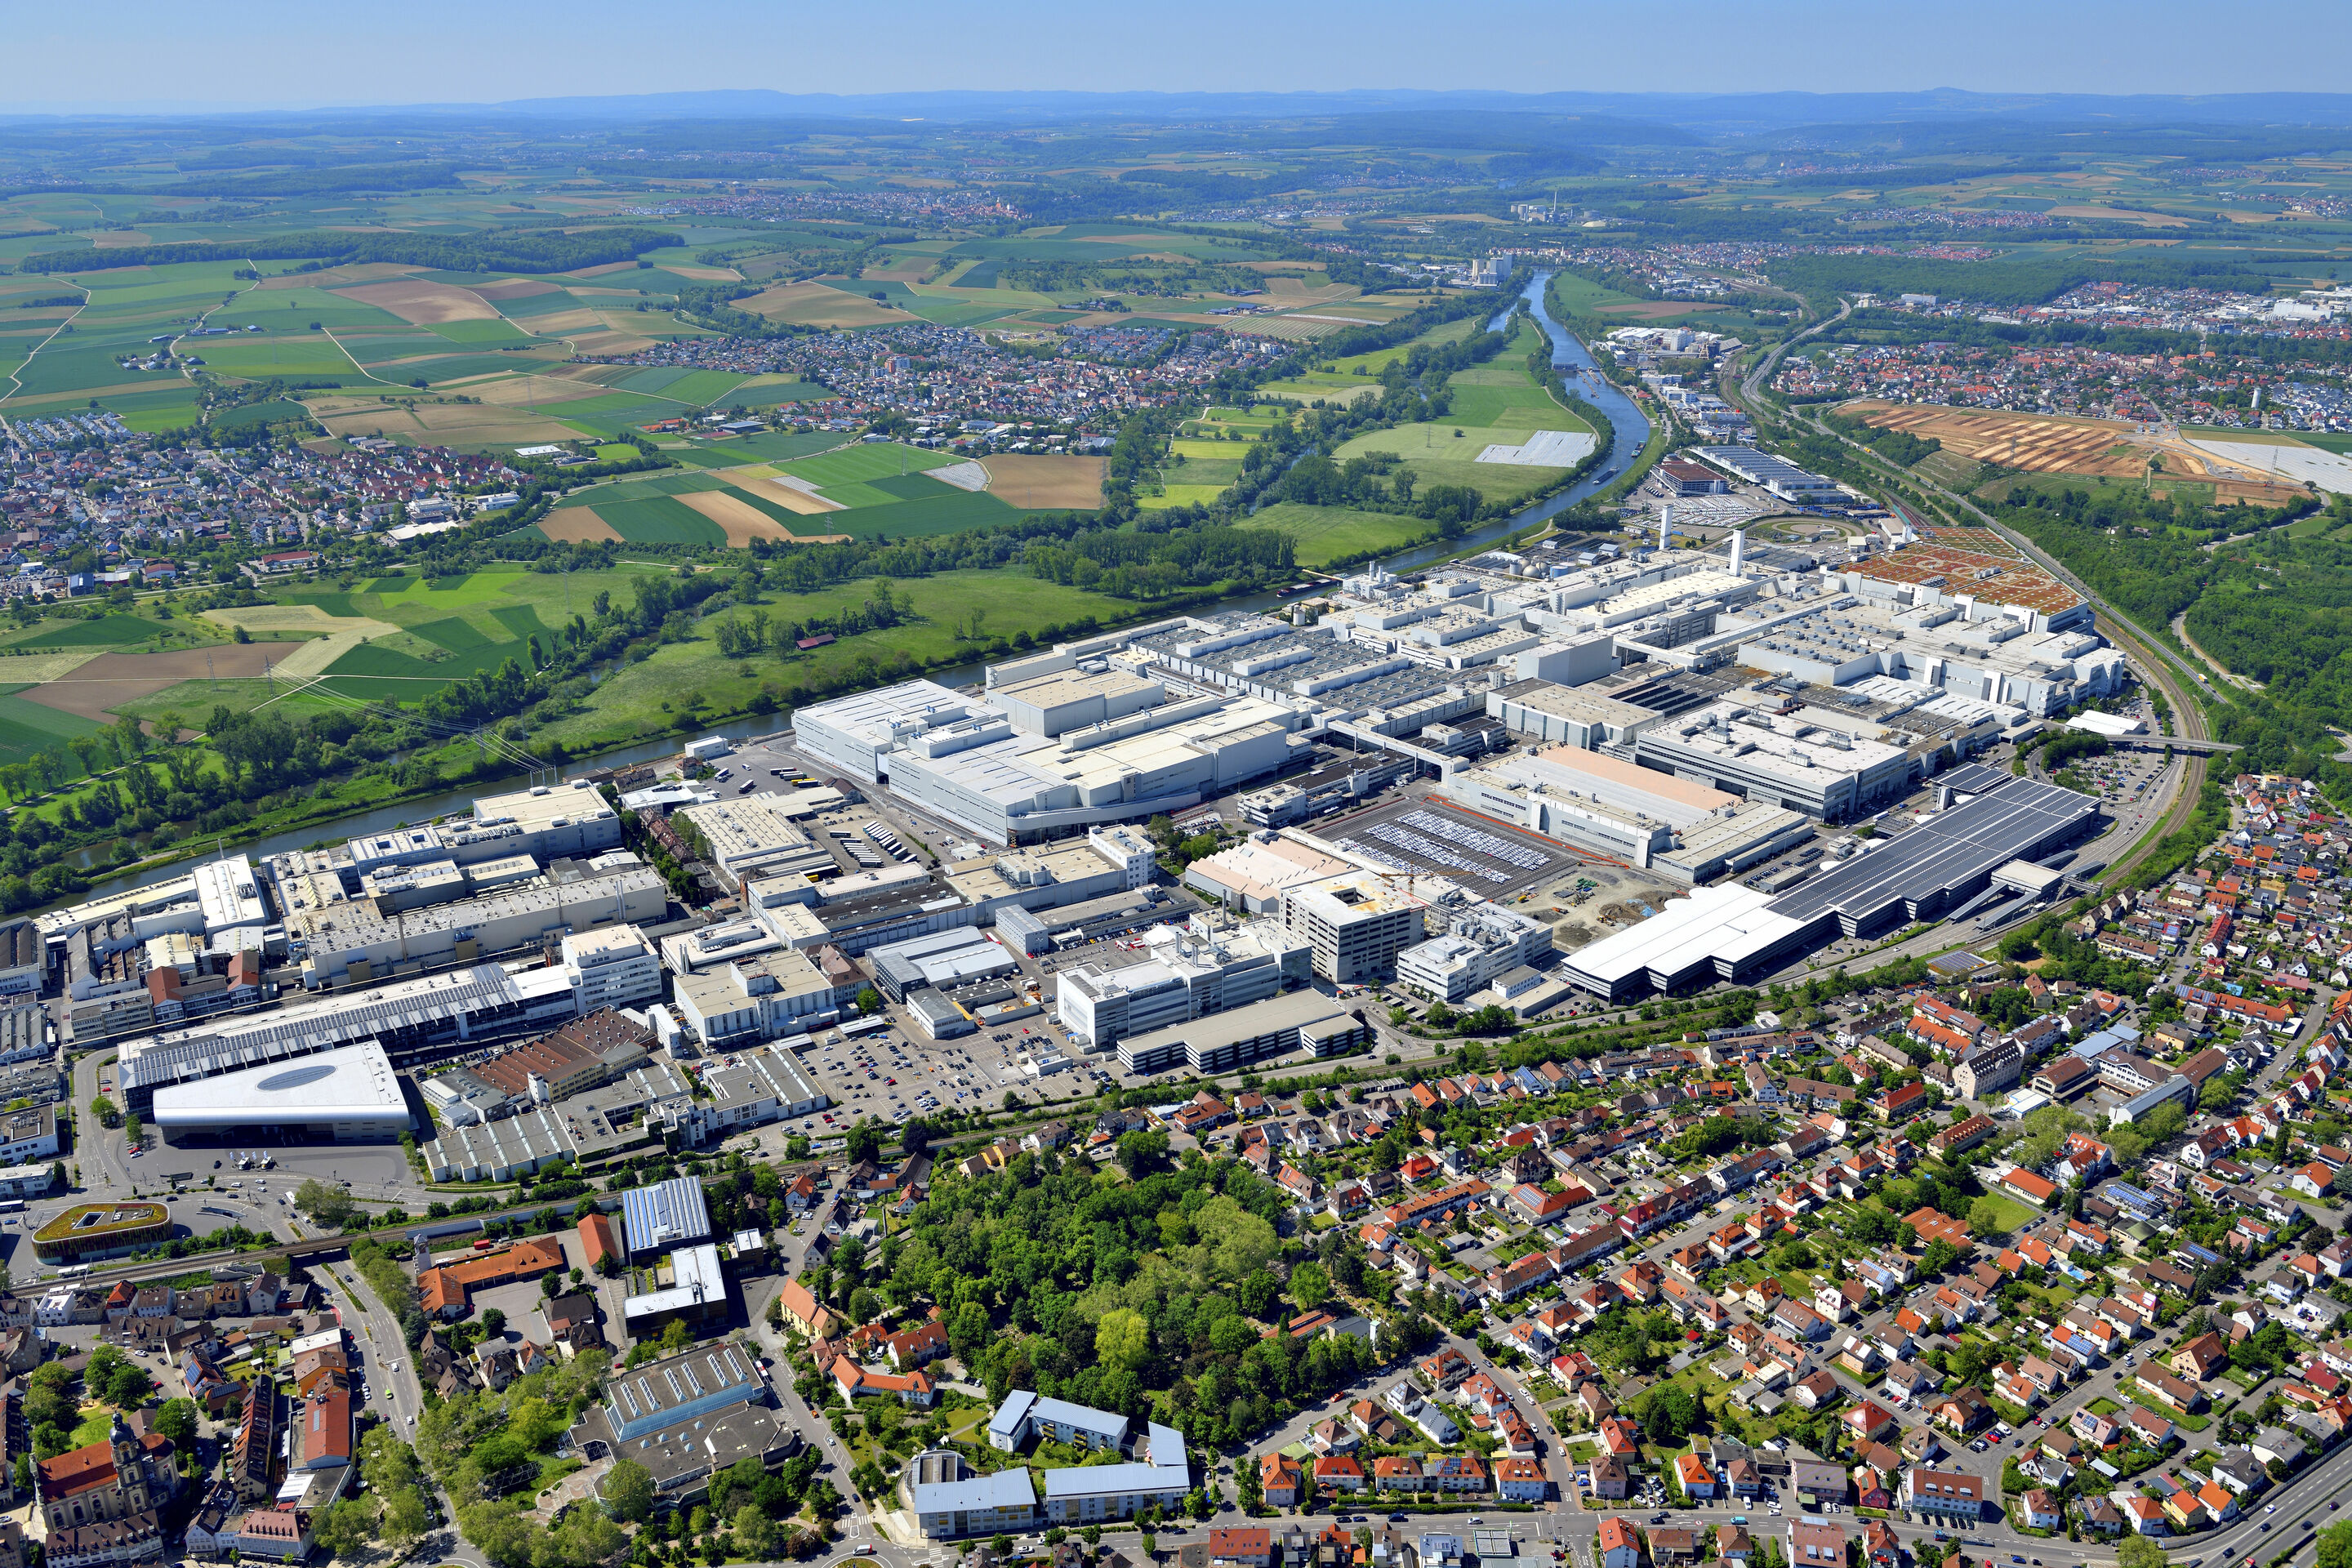 Audi is establishing its own high-voltage battery development at the Neckarsulm site